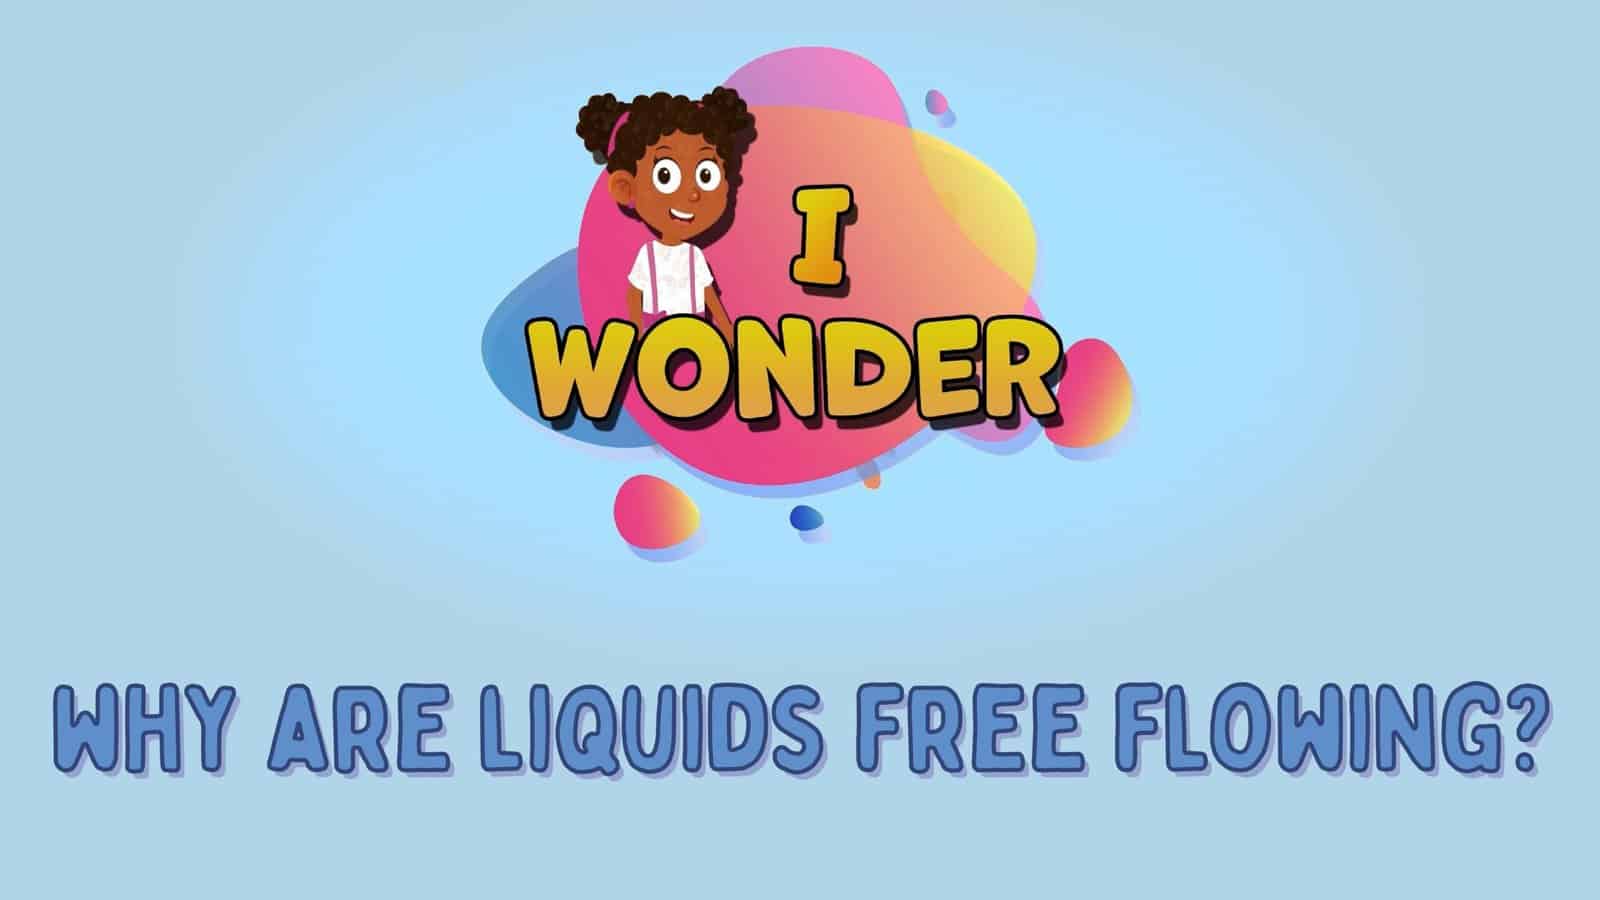 Why Are Liquids Free Flowing?